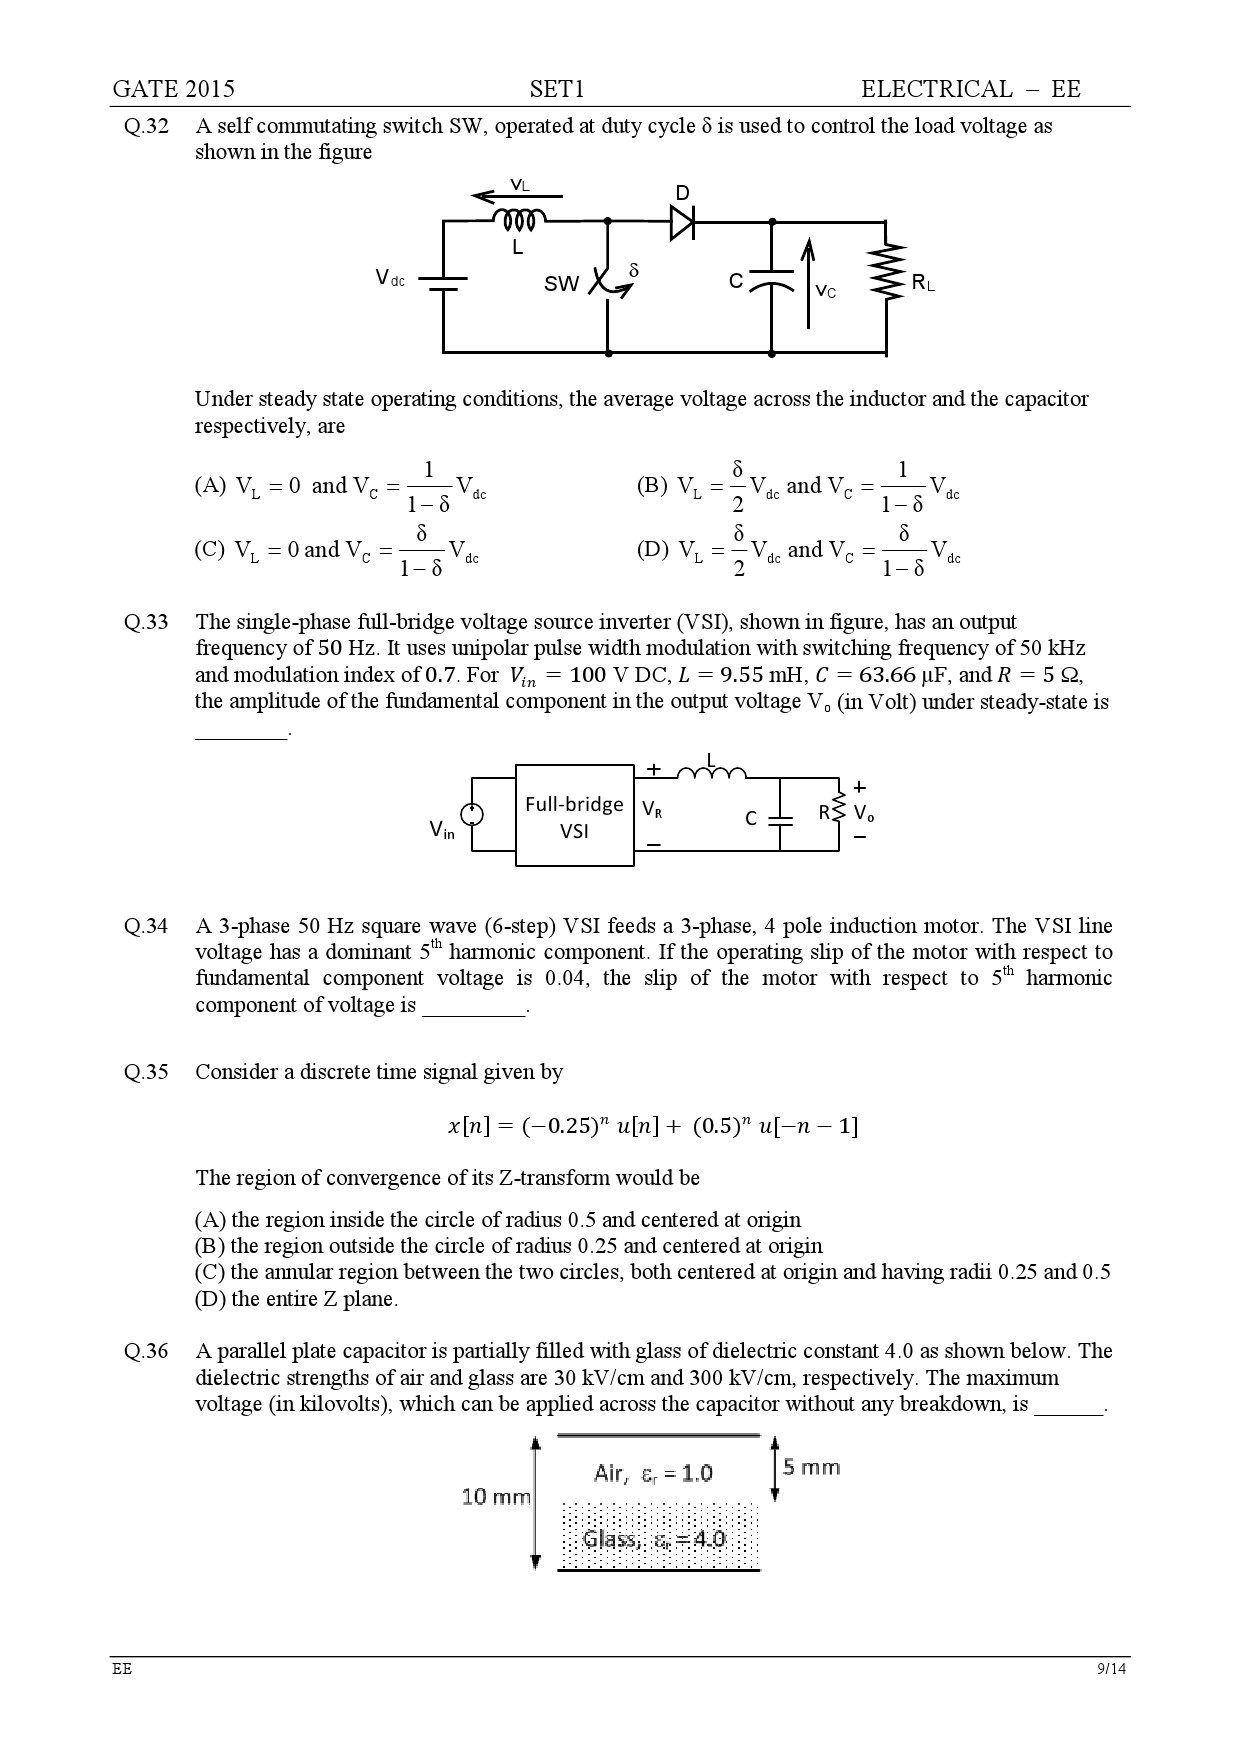 GATE Exam Question Paper 2015 Electrical Engineering Set 1 9